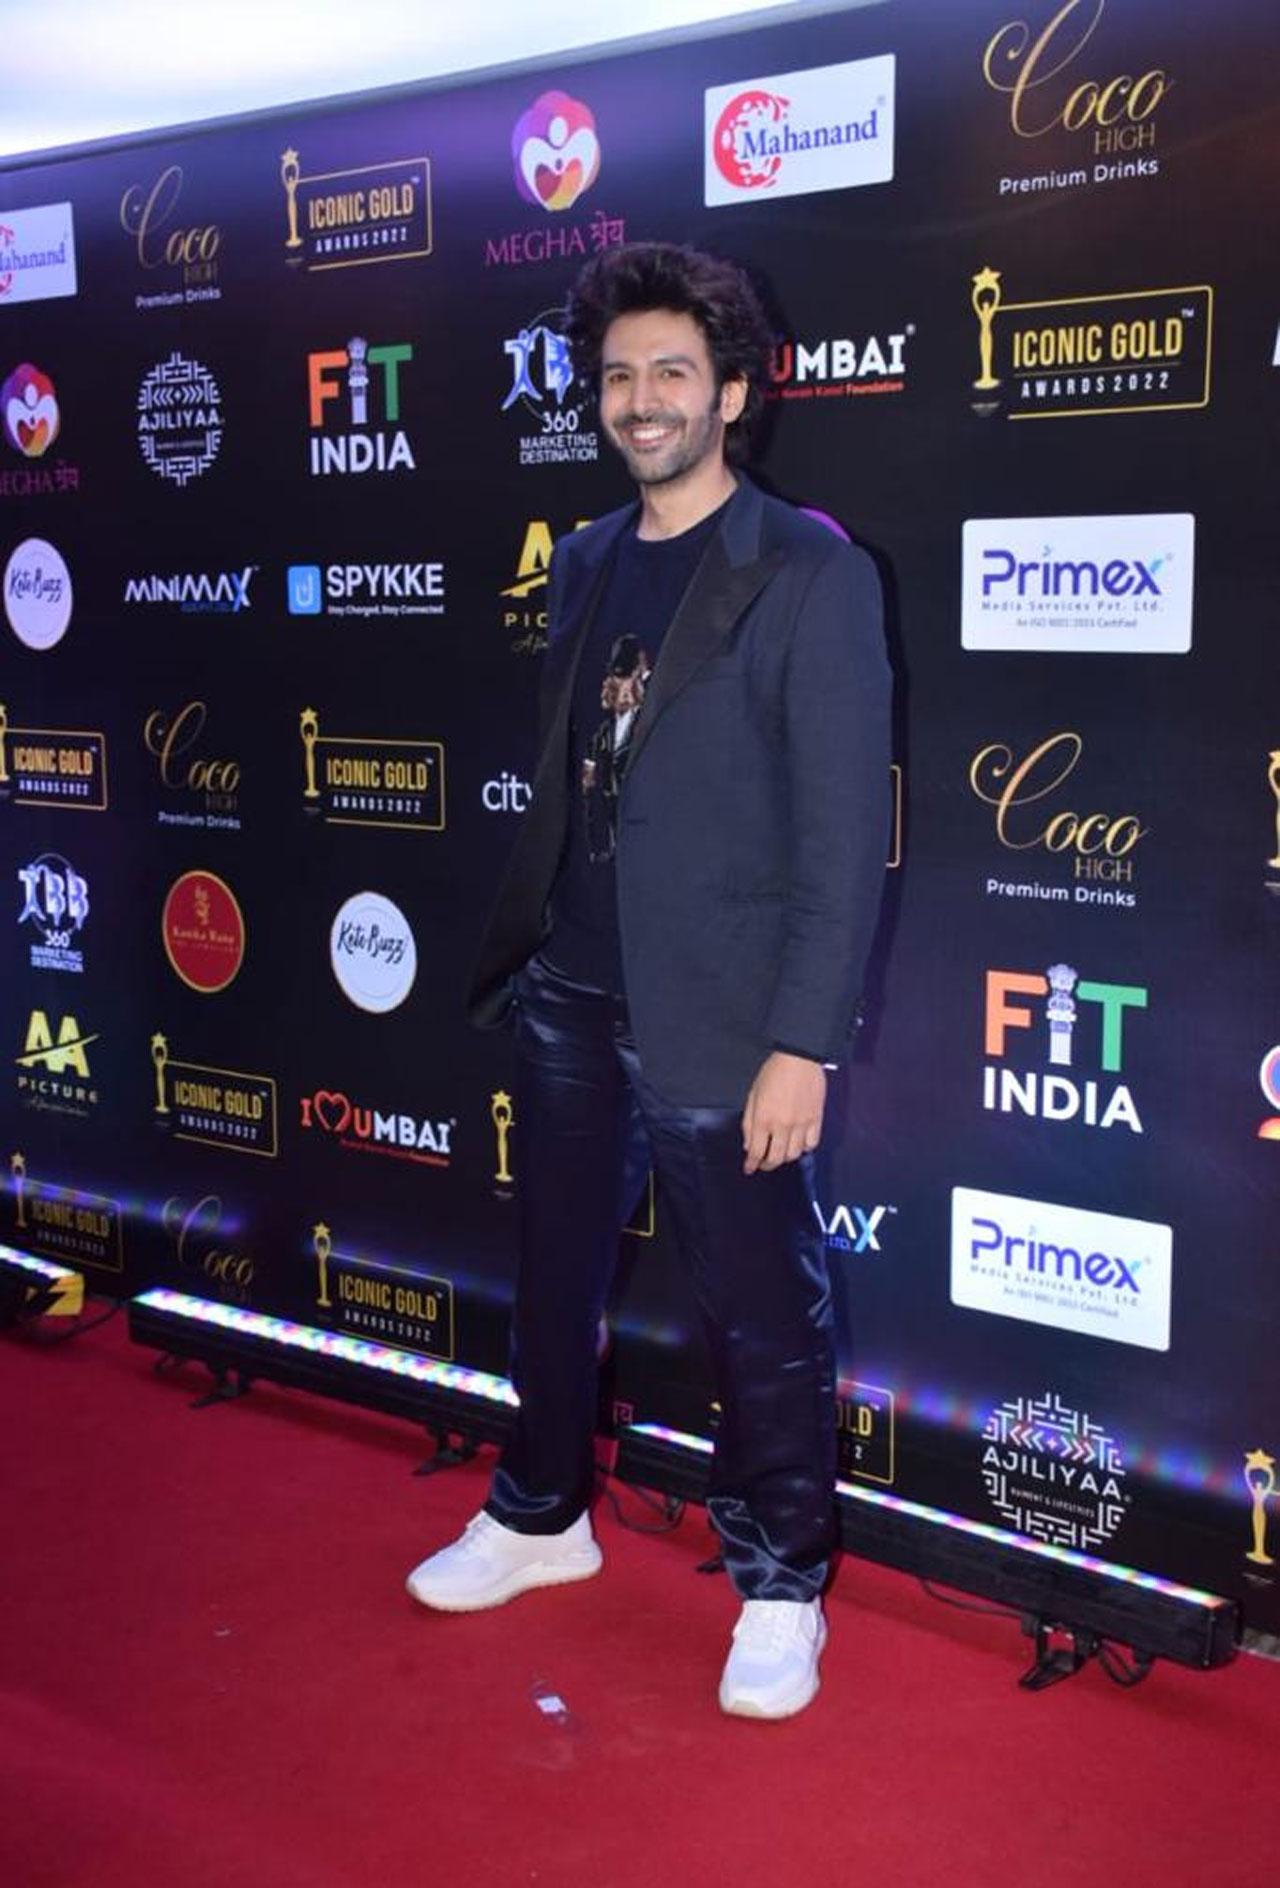 Kartik Aaryan has all the reasons to smile as he won an award for 'Dhamaka'. Taking to his social media, Kartik shared a picture doing the winning gesture as he proudly and happily held his award. In the caption the versatile star wrote, 